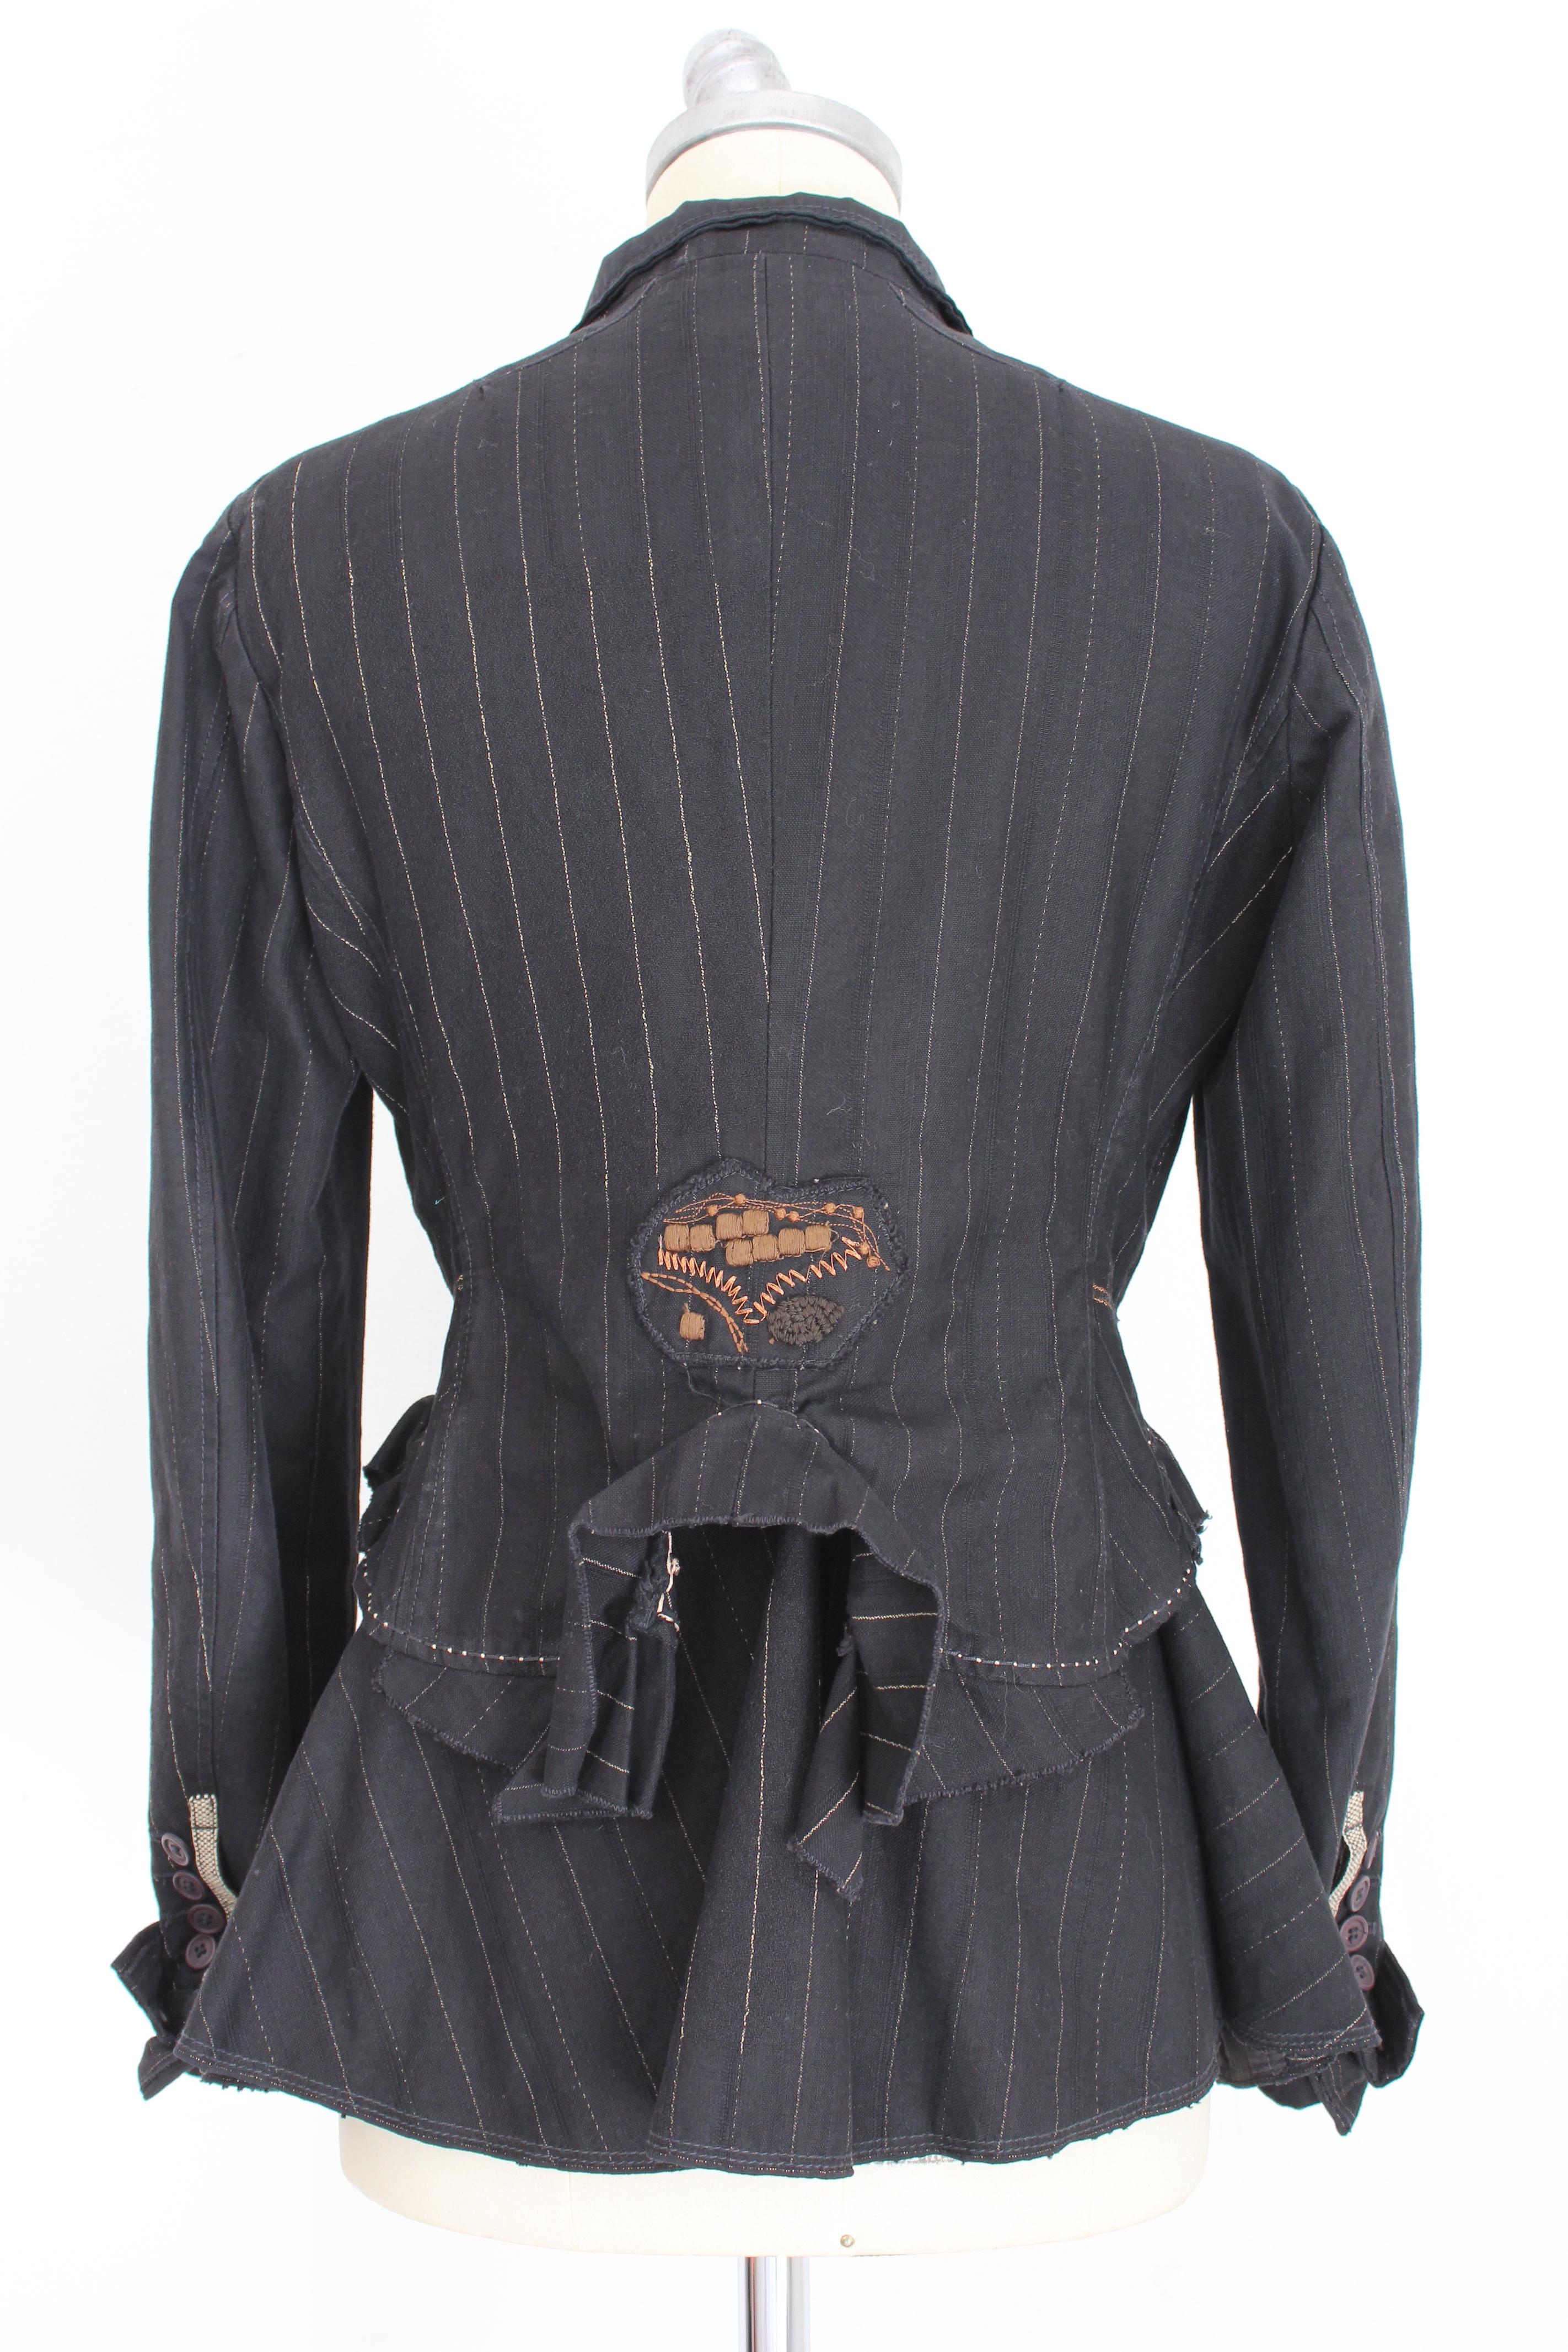 Marithe Francois Girbaud vintage 2000s women's jacket. Pinstripe blazer, black and beige. On the back of the jacket there is an embroidered application and a double layer of jacket that goes down soft. 99% cotton 1% polyester fabric, internally